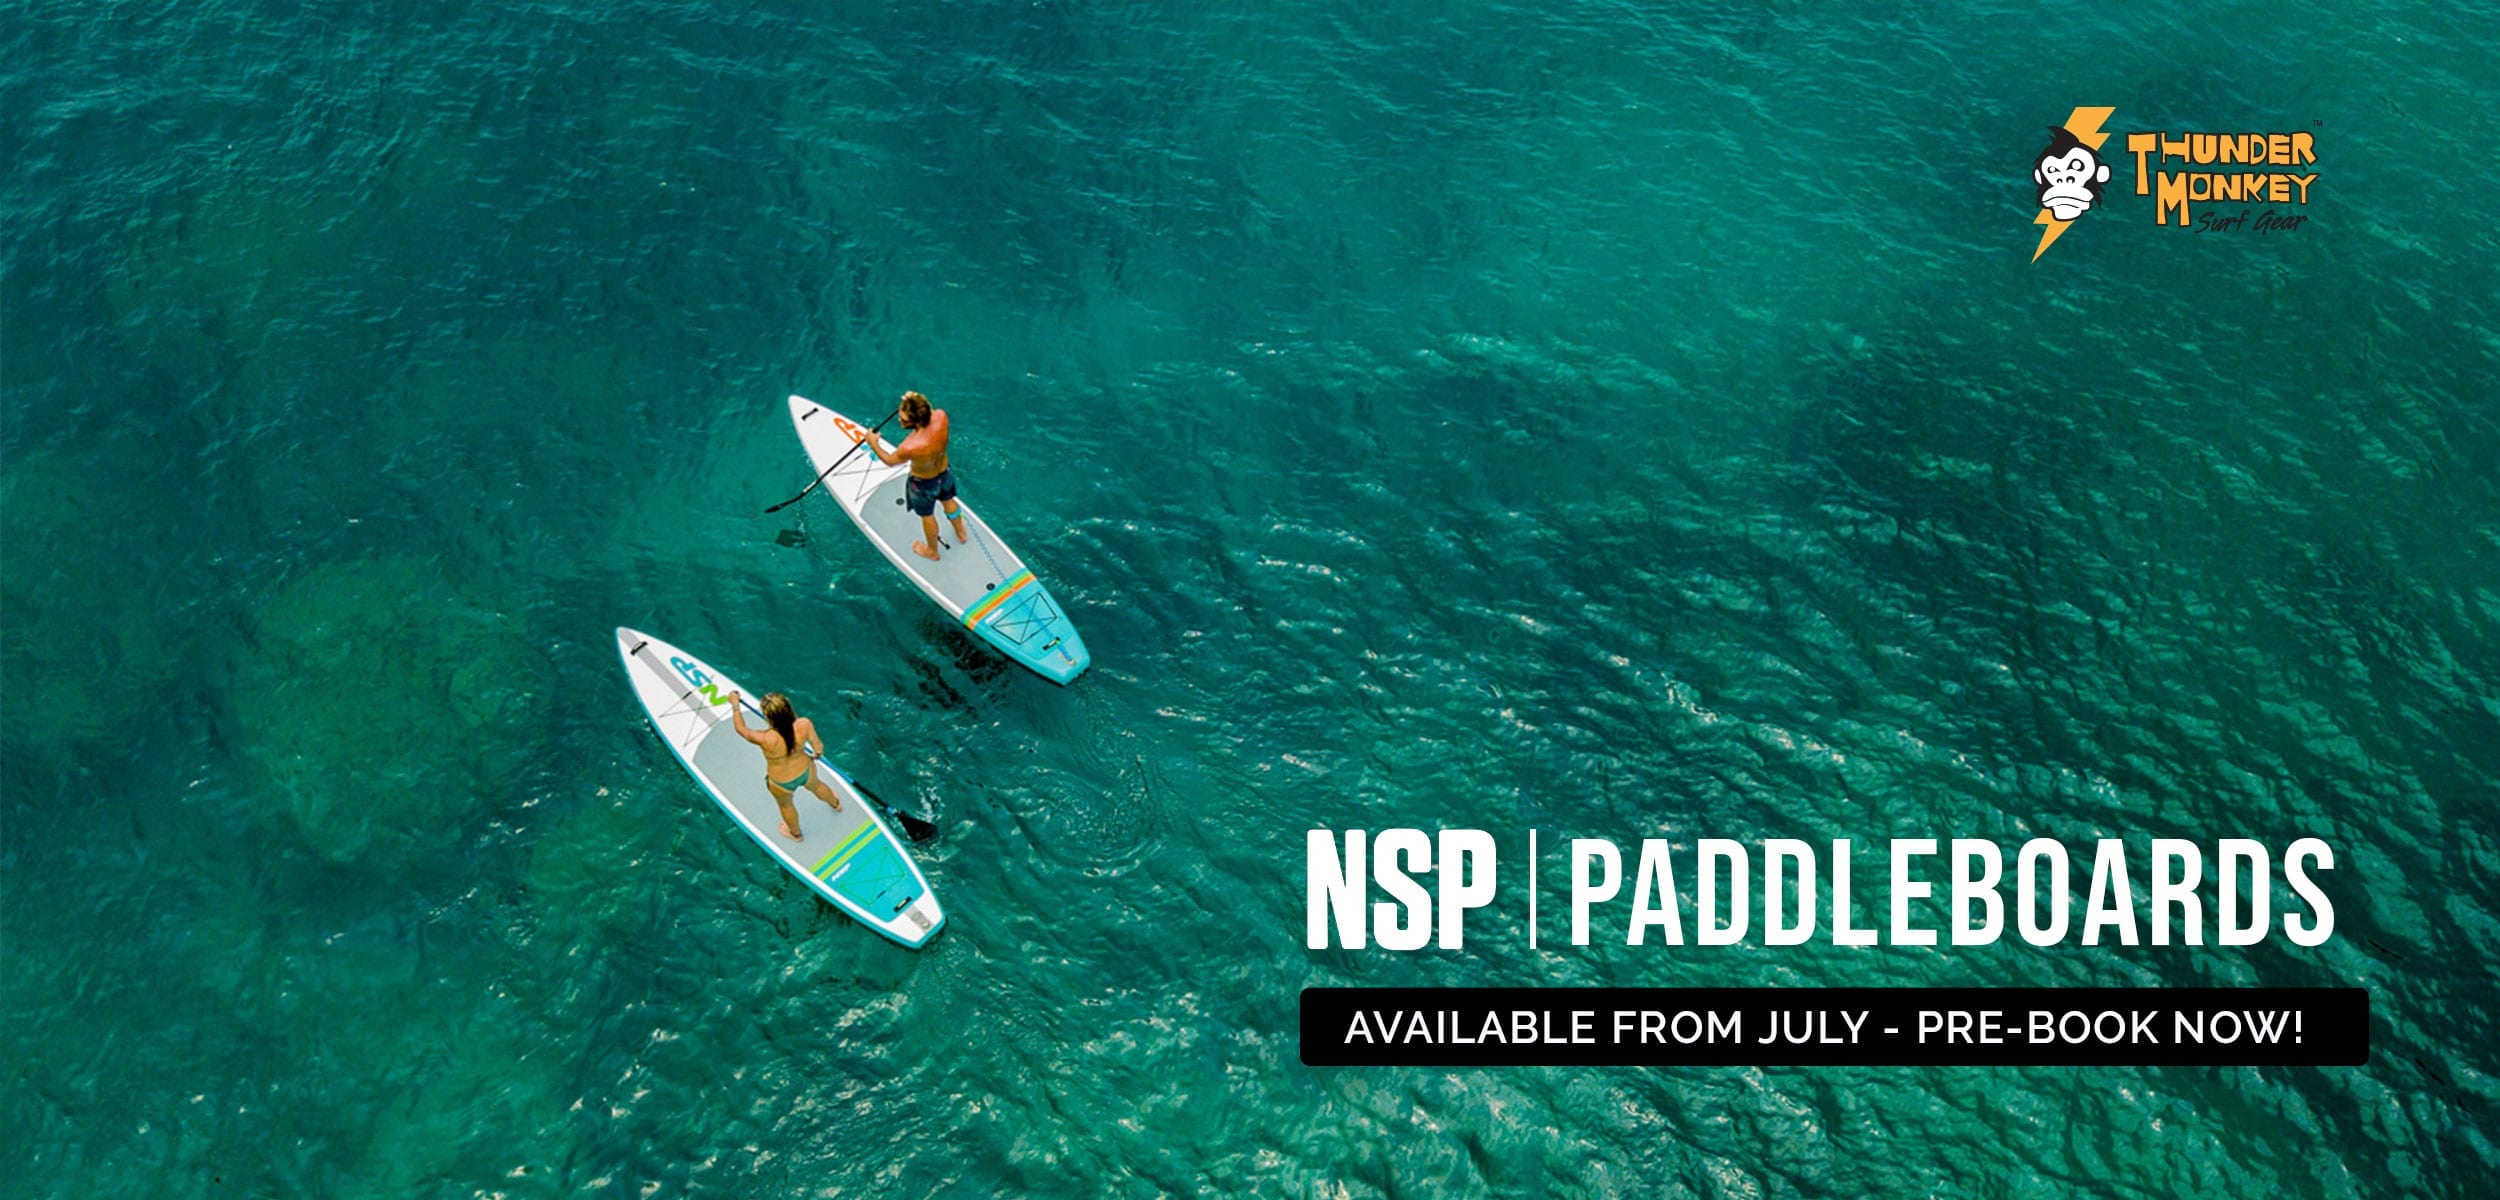 Buy Surfgear in India - NSP Paddleboards